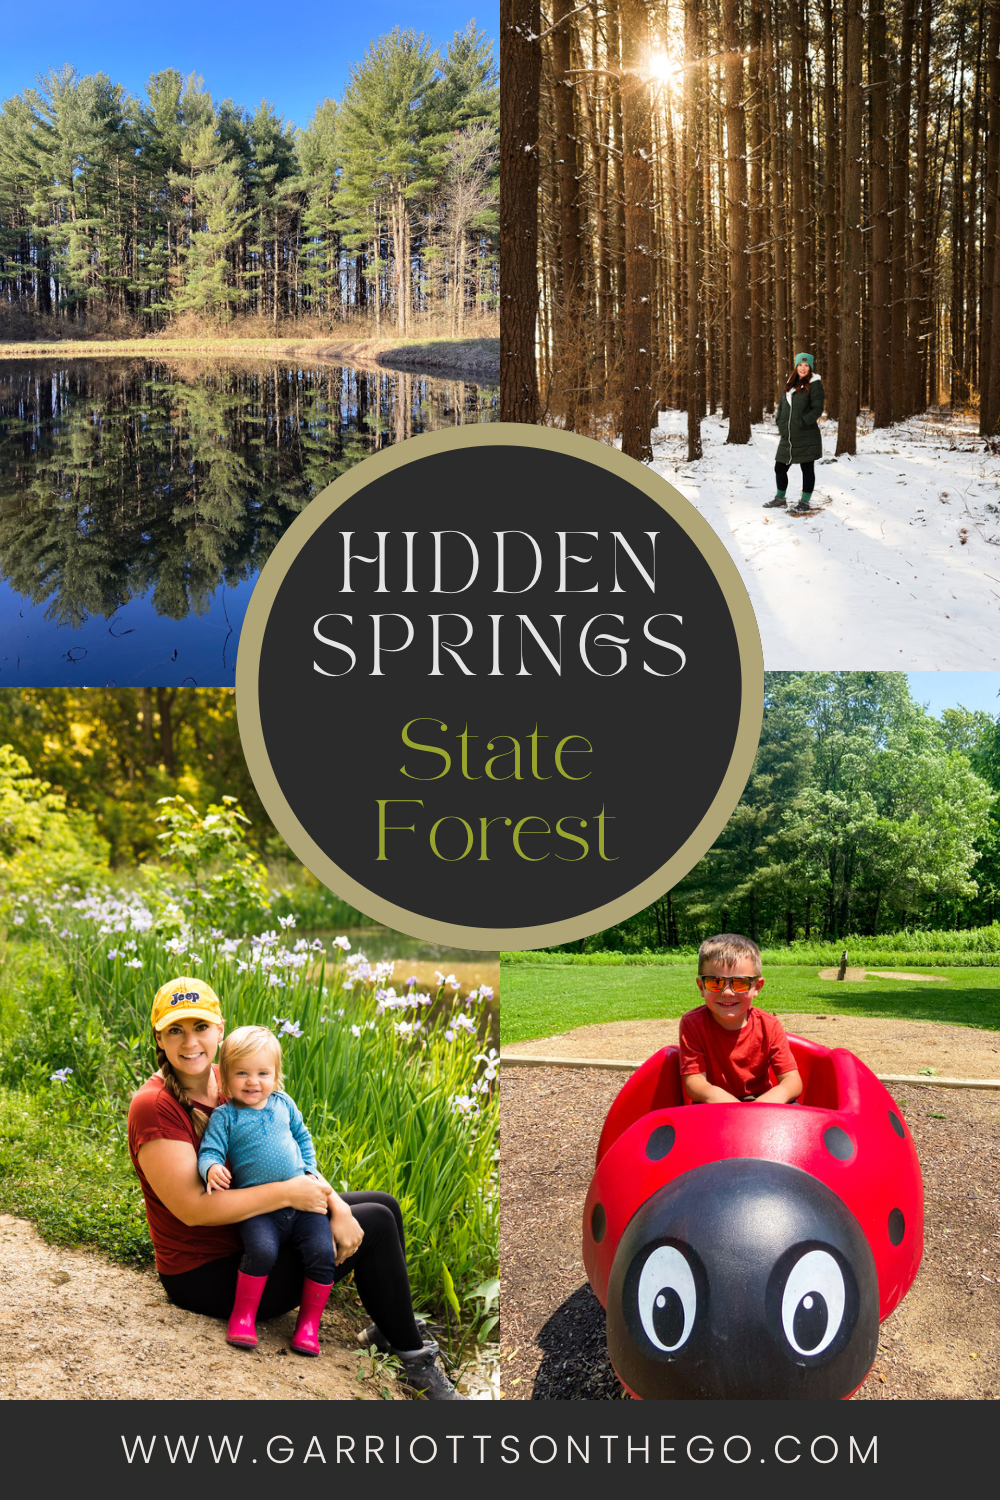 Hidden Springs State Forest: A Central Illinois Scenic Adventure